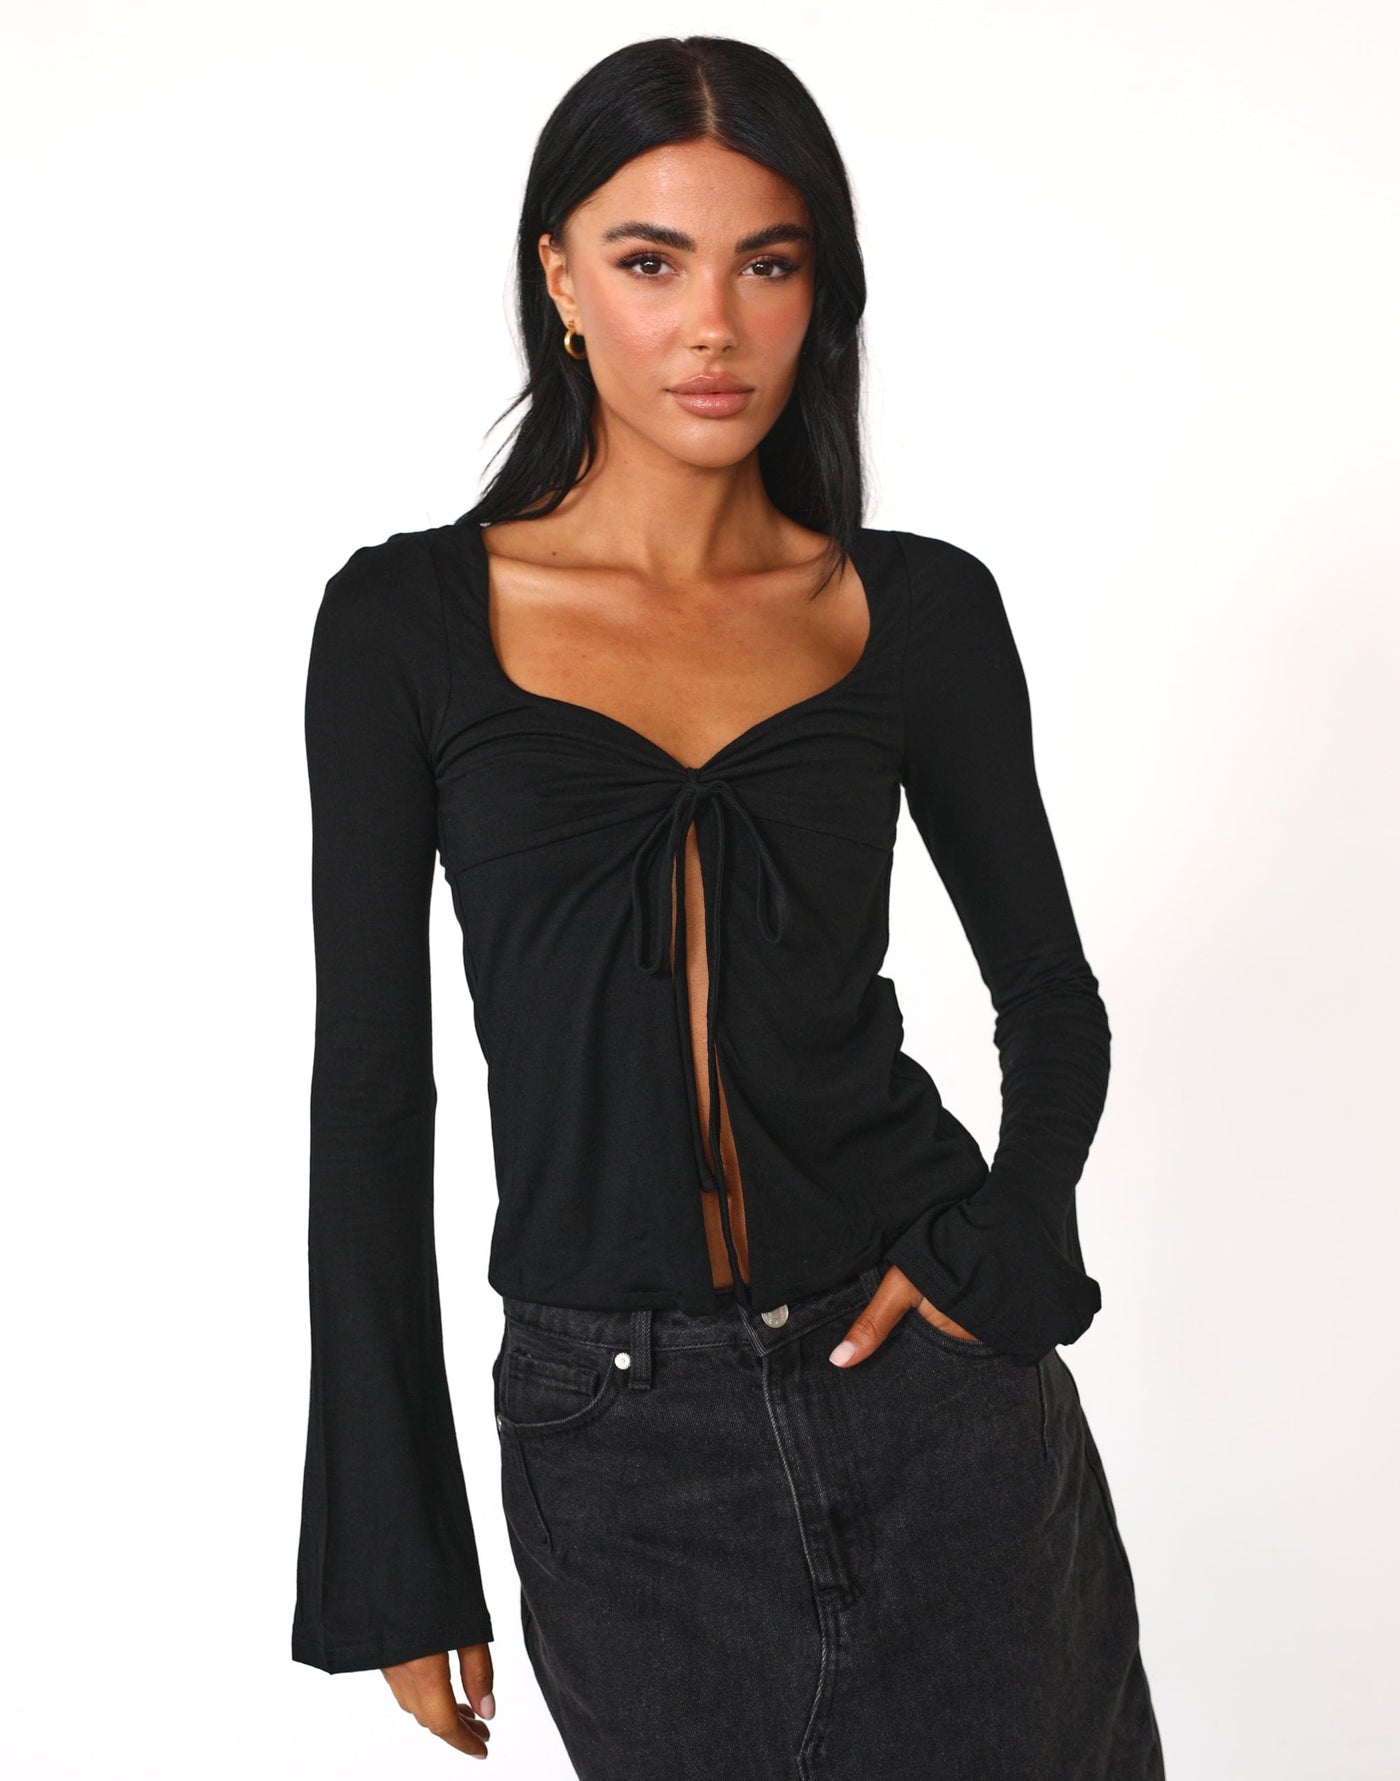 Lalela Top (Black) - Long Sleeve Tie-up Front Top - Women's Top - Charcoal Clothing